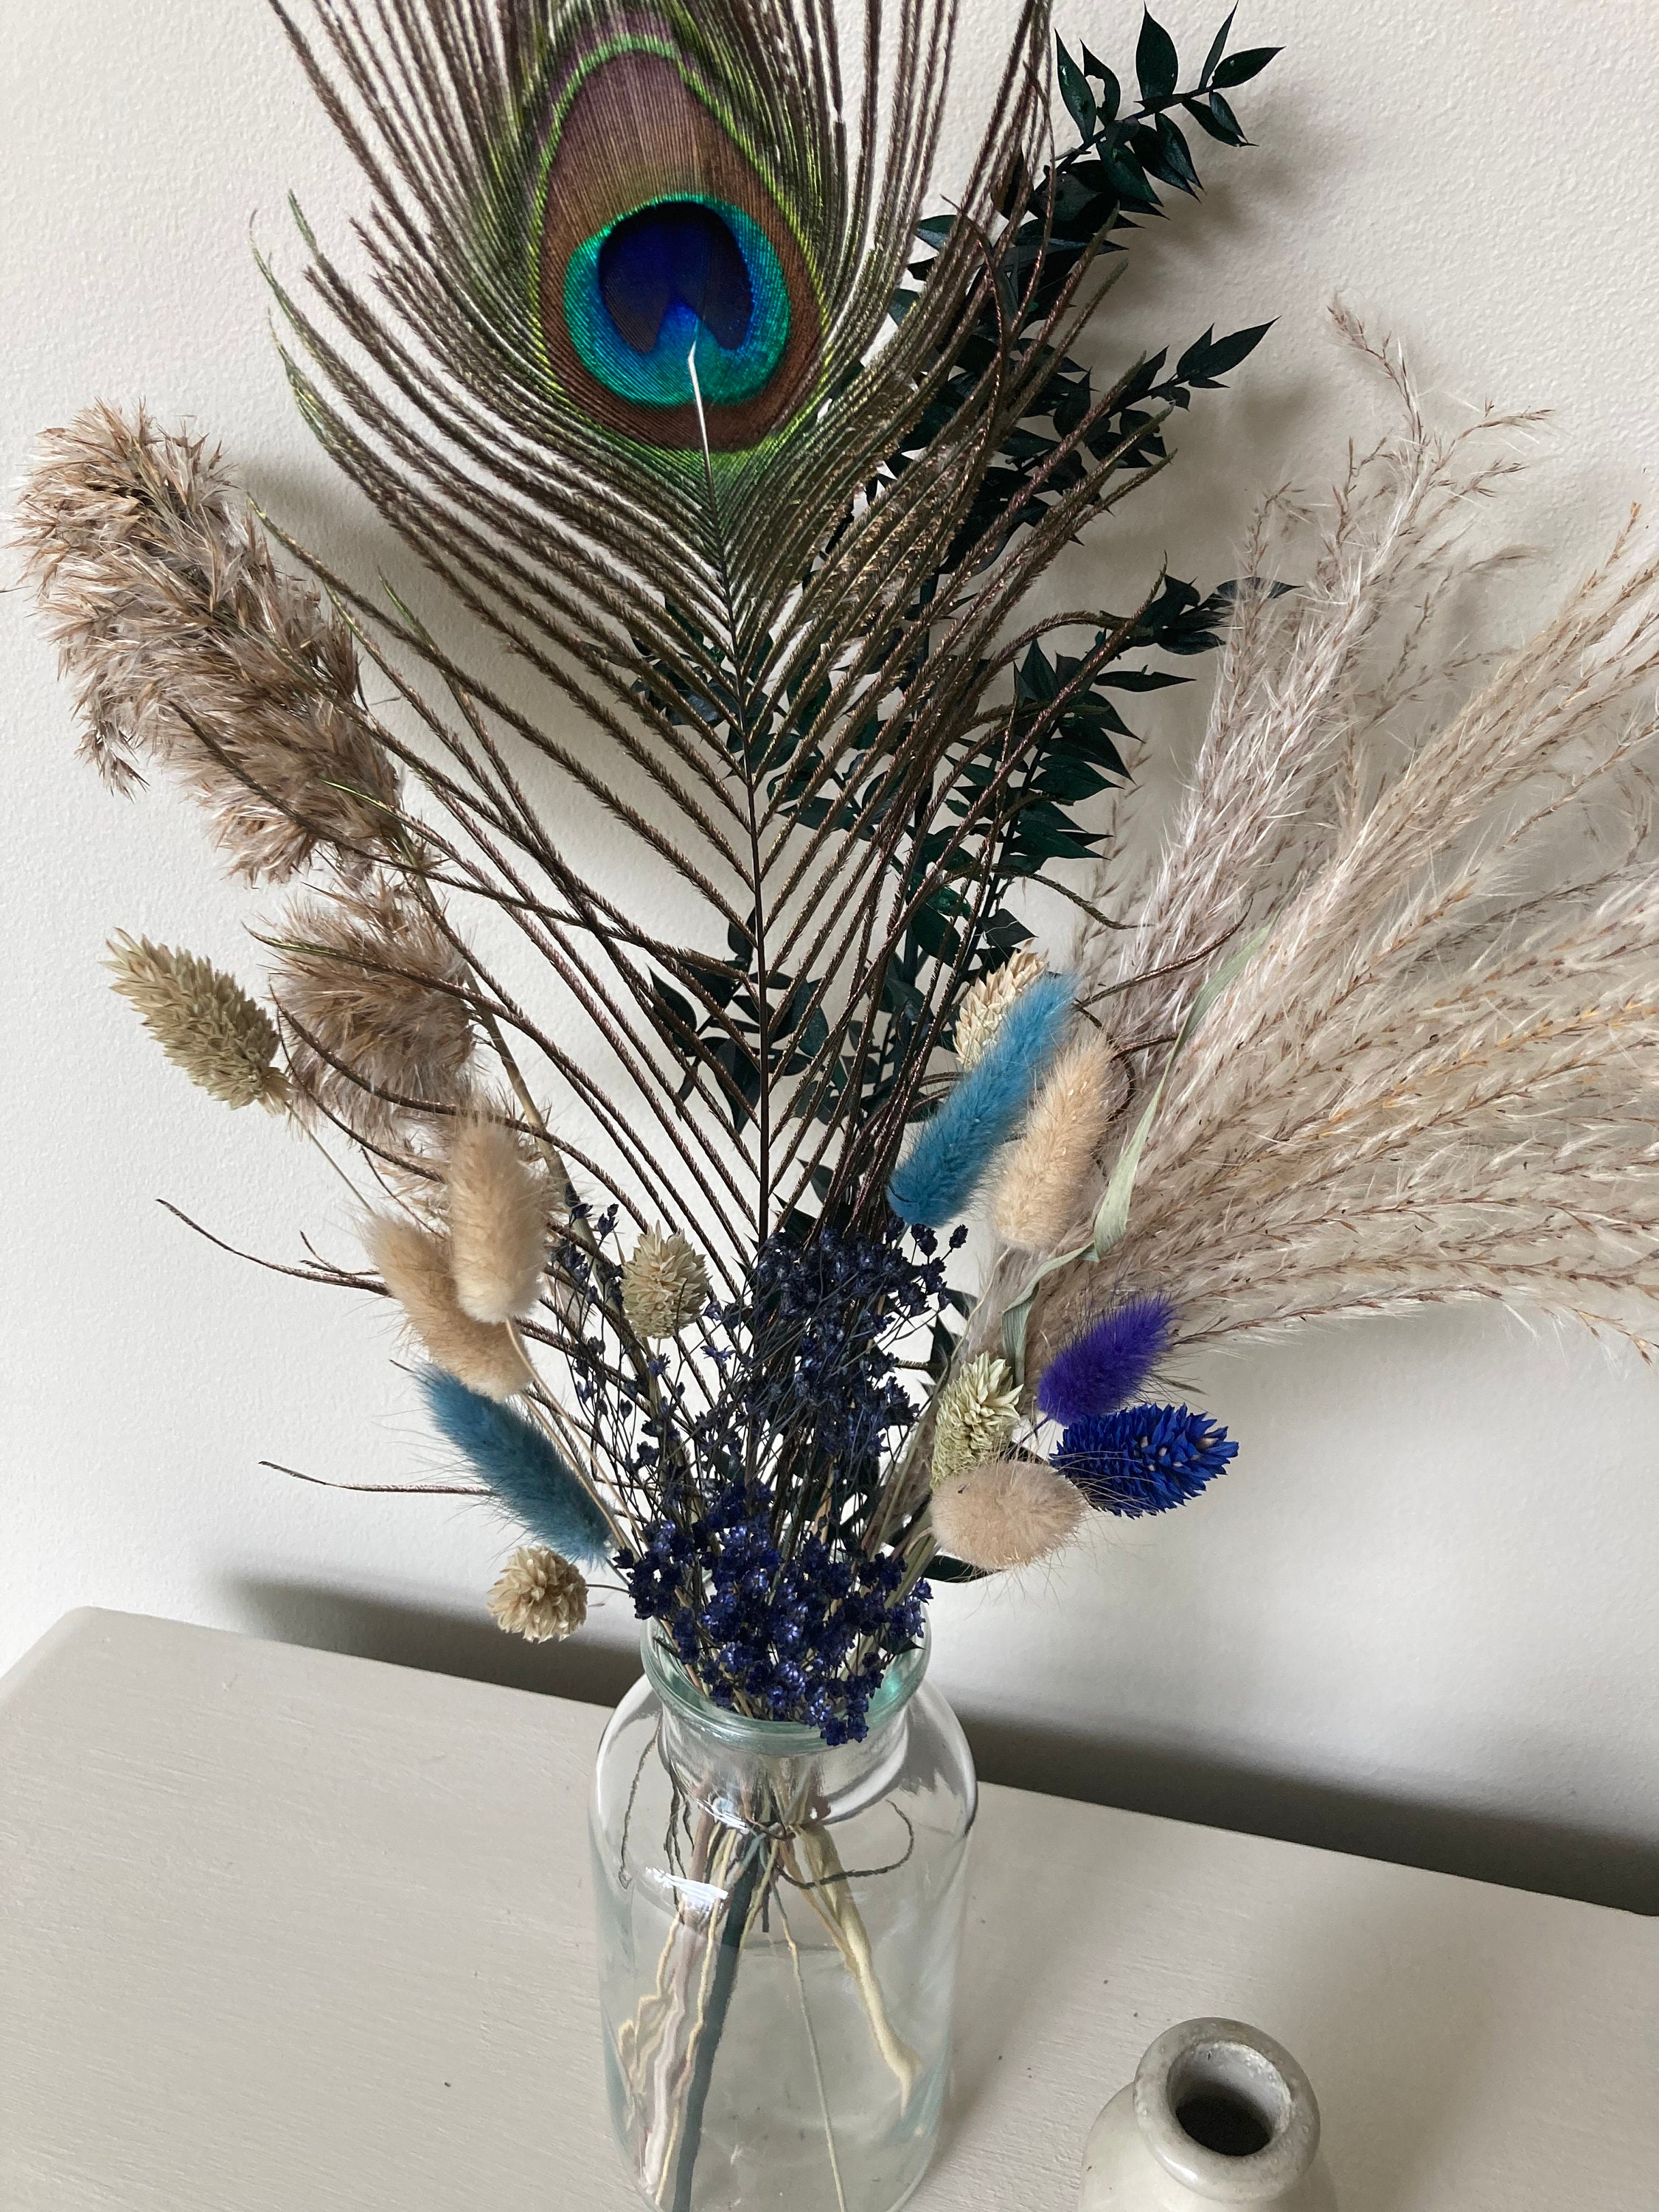 Mantel Decor :: Decorating with Pampas Grass and Peacock Feathers